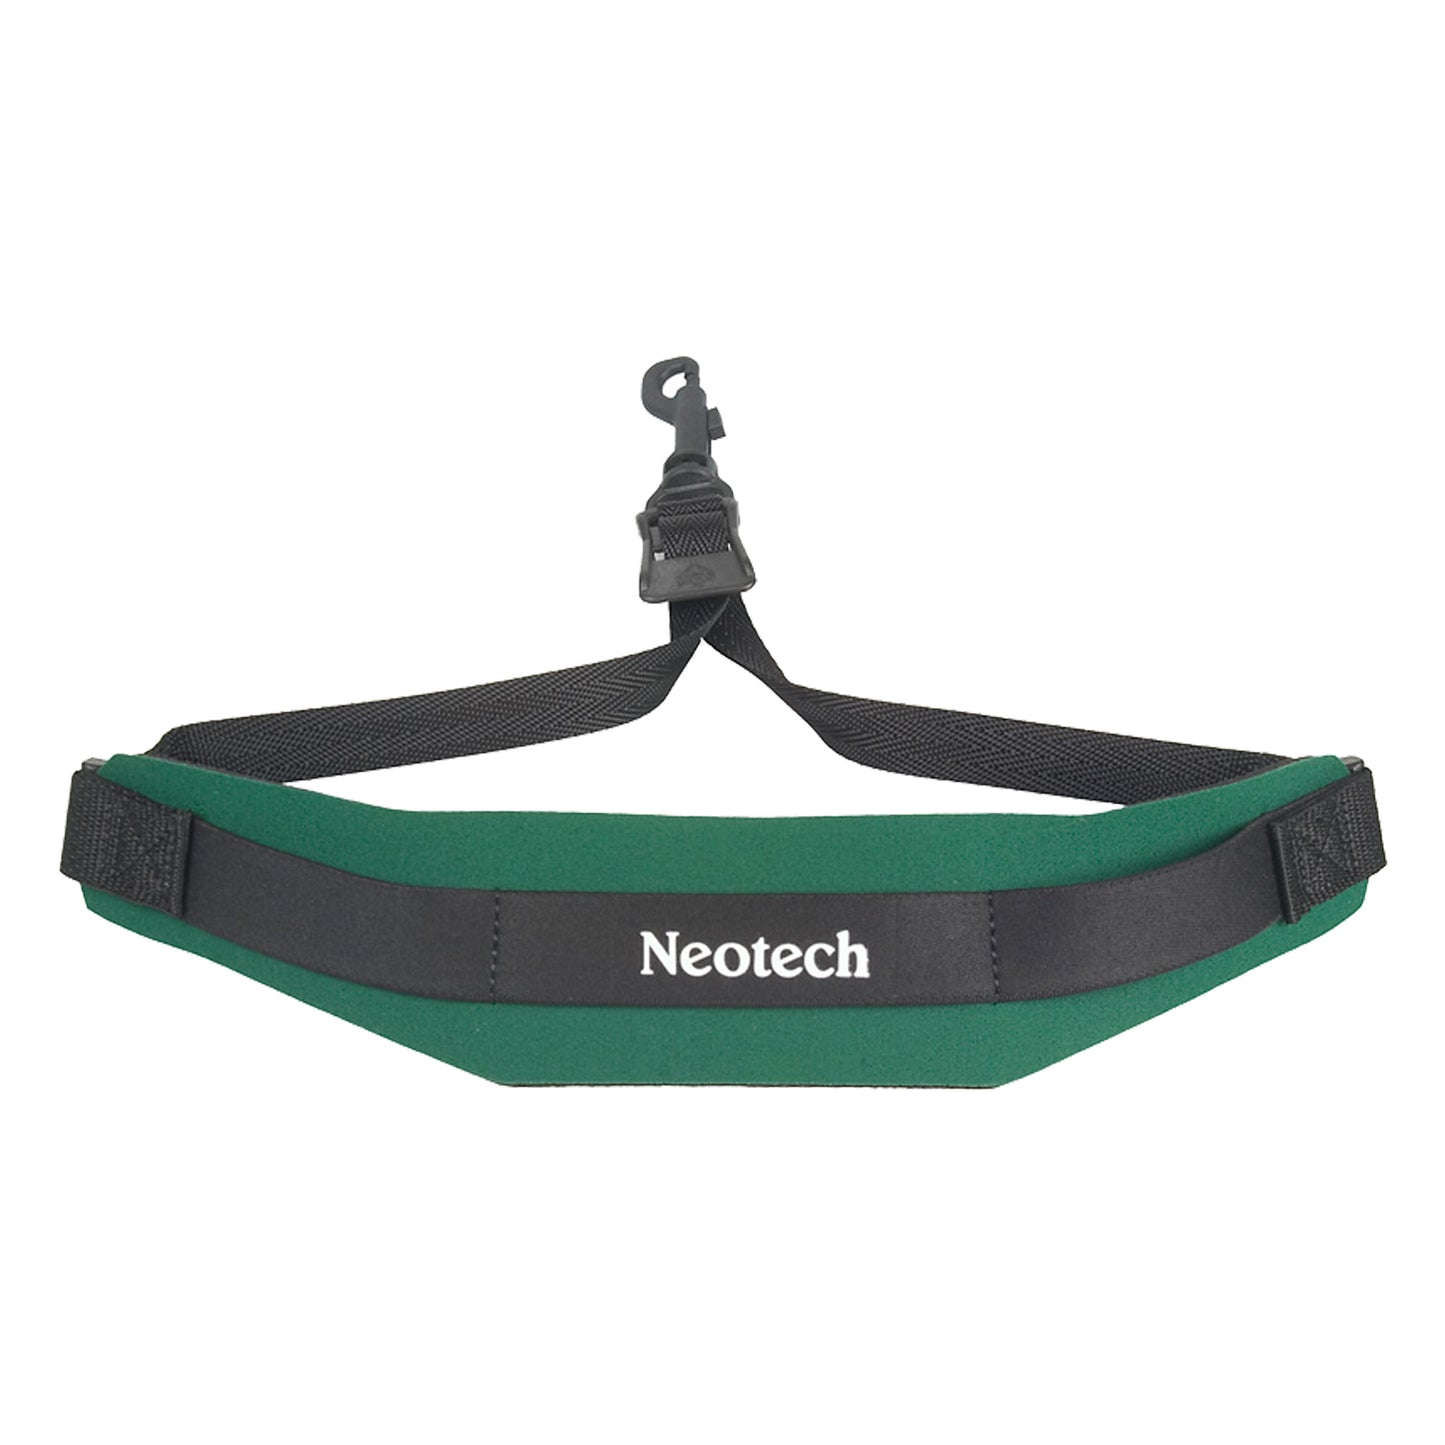 Neotech Soft Sax Strap in Forest Green with Swivel Hook